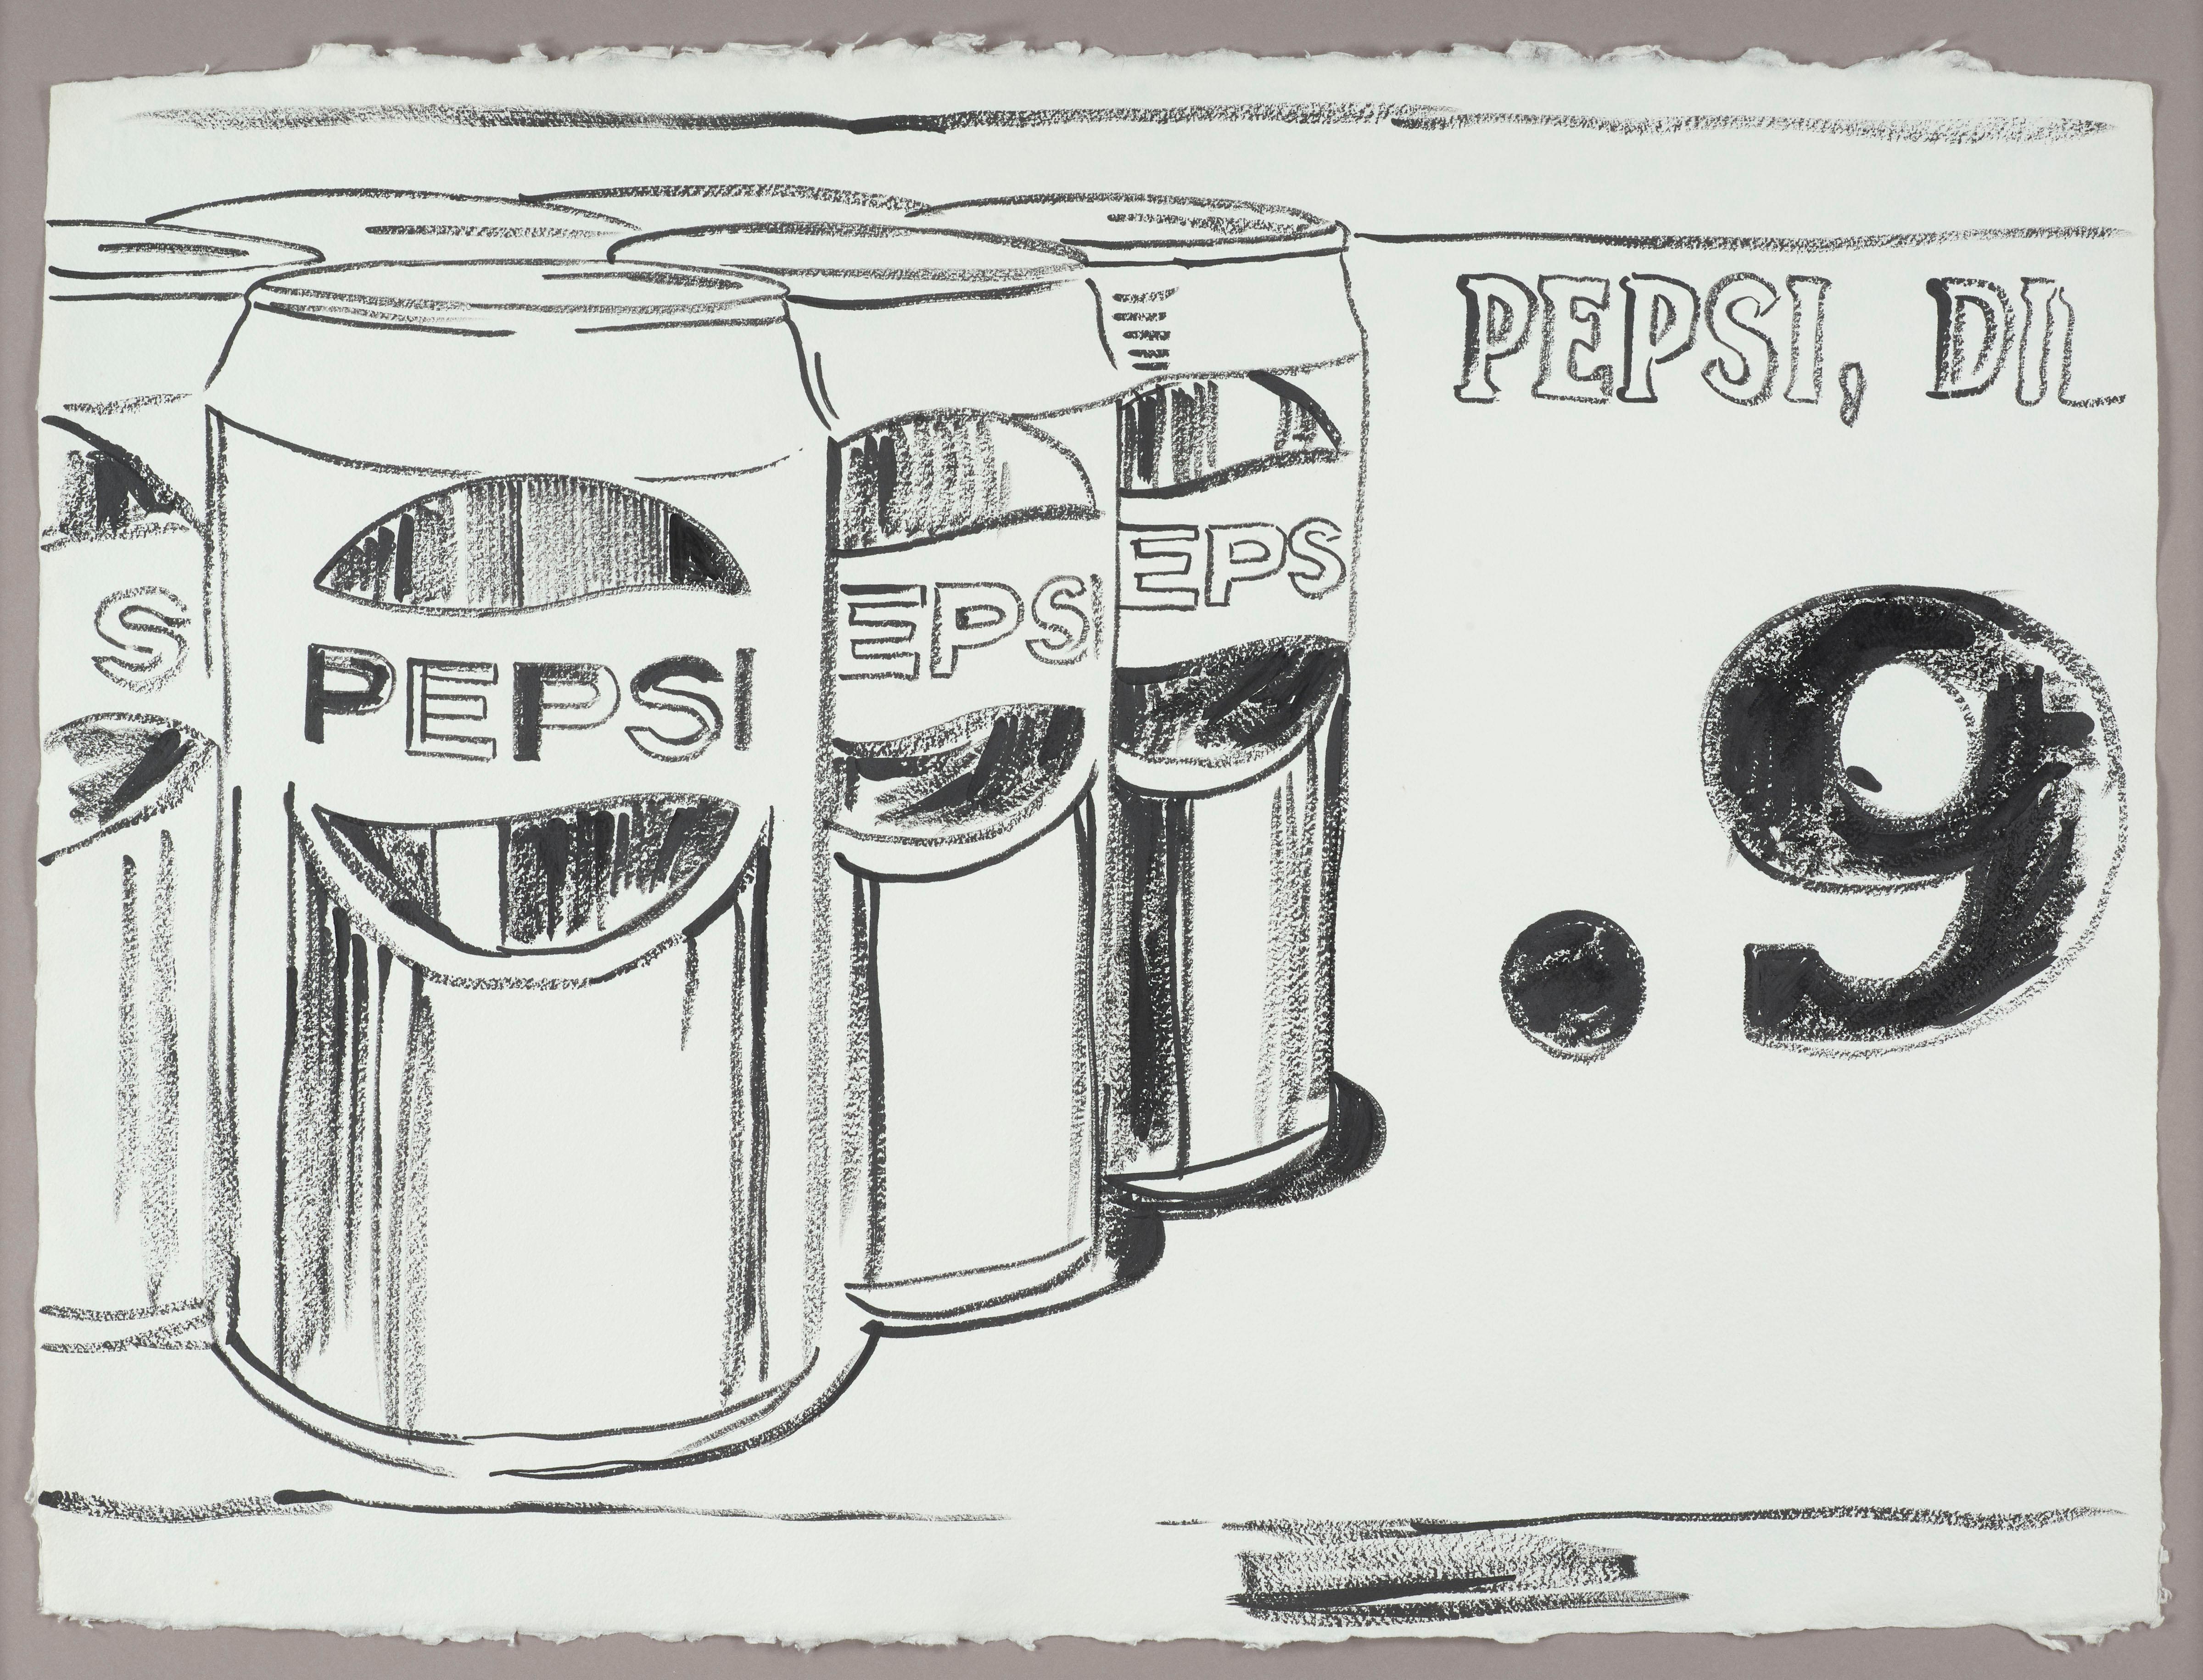 Pepsi Cans - Painting by Andy Warhol